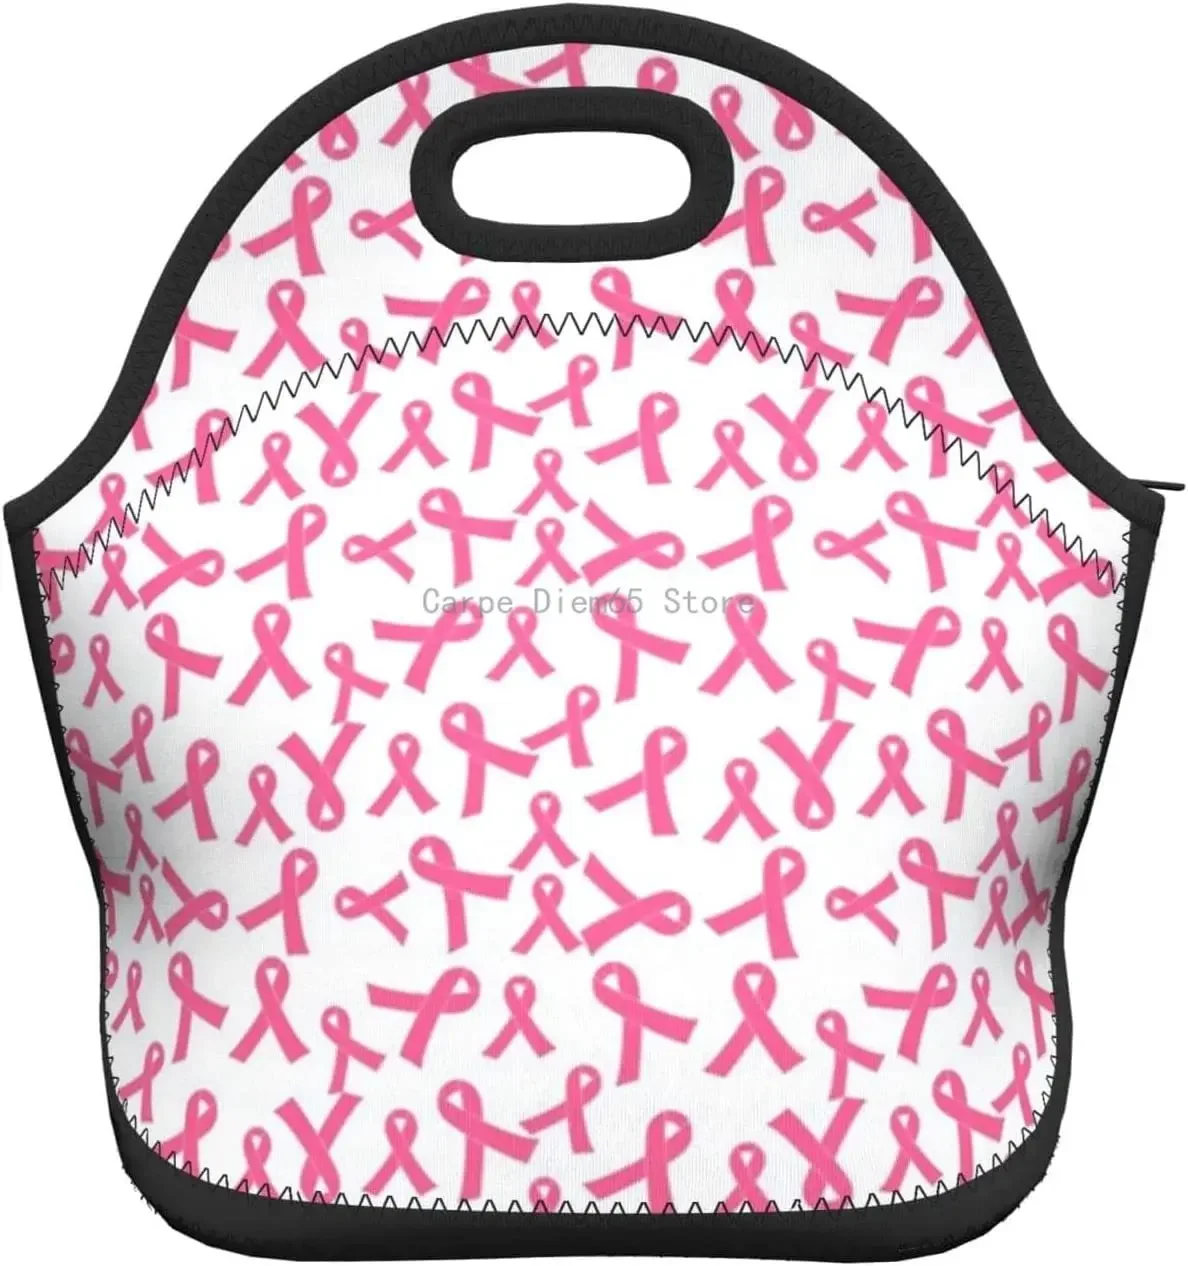 

Ribbons Breast Cancer Lunch Box Reusable Lunch Bag Tote Bag Insulated Lunch Bag for Women Men Lunch Box for Camping Gifts School